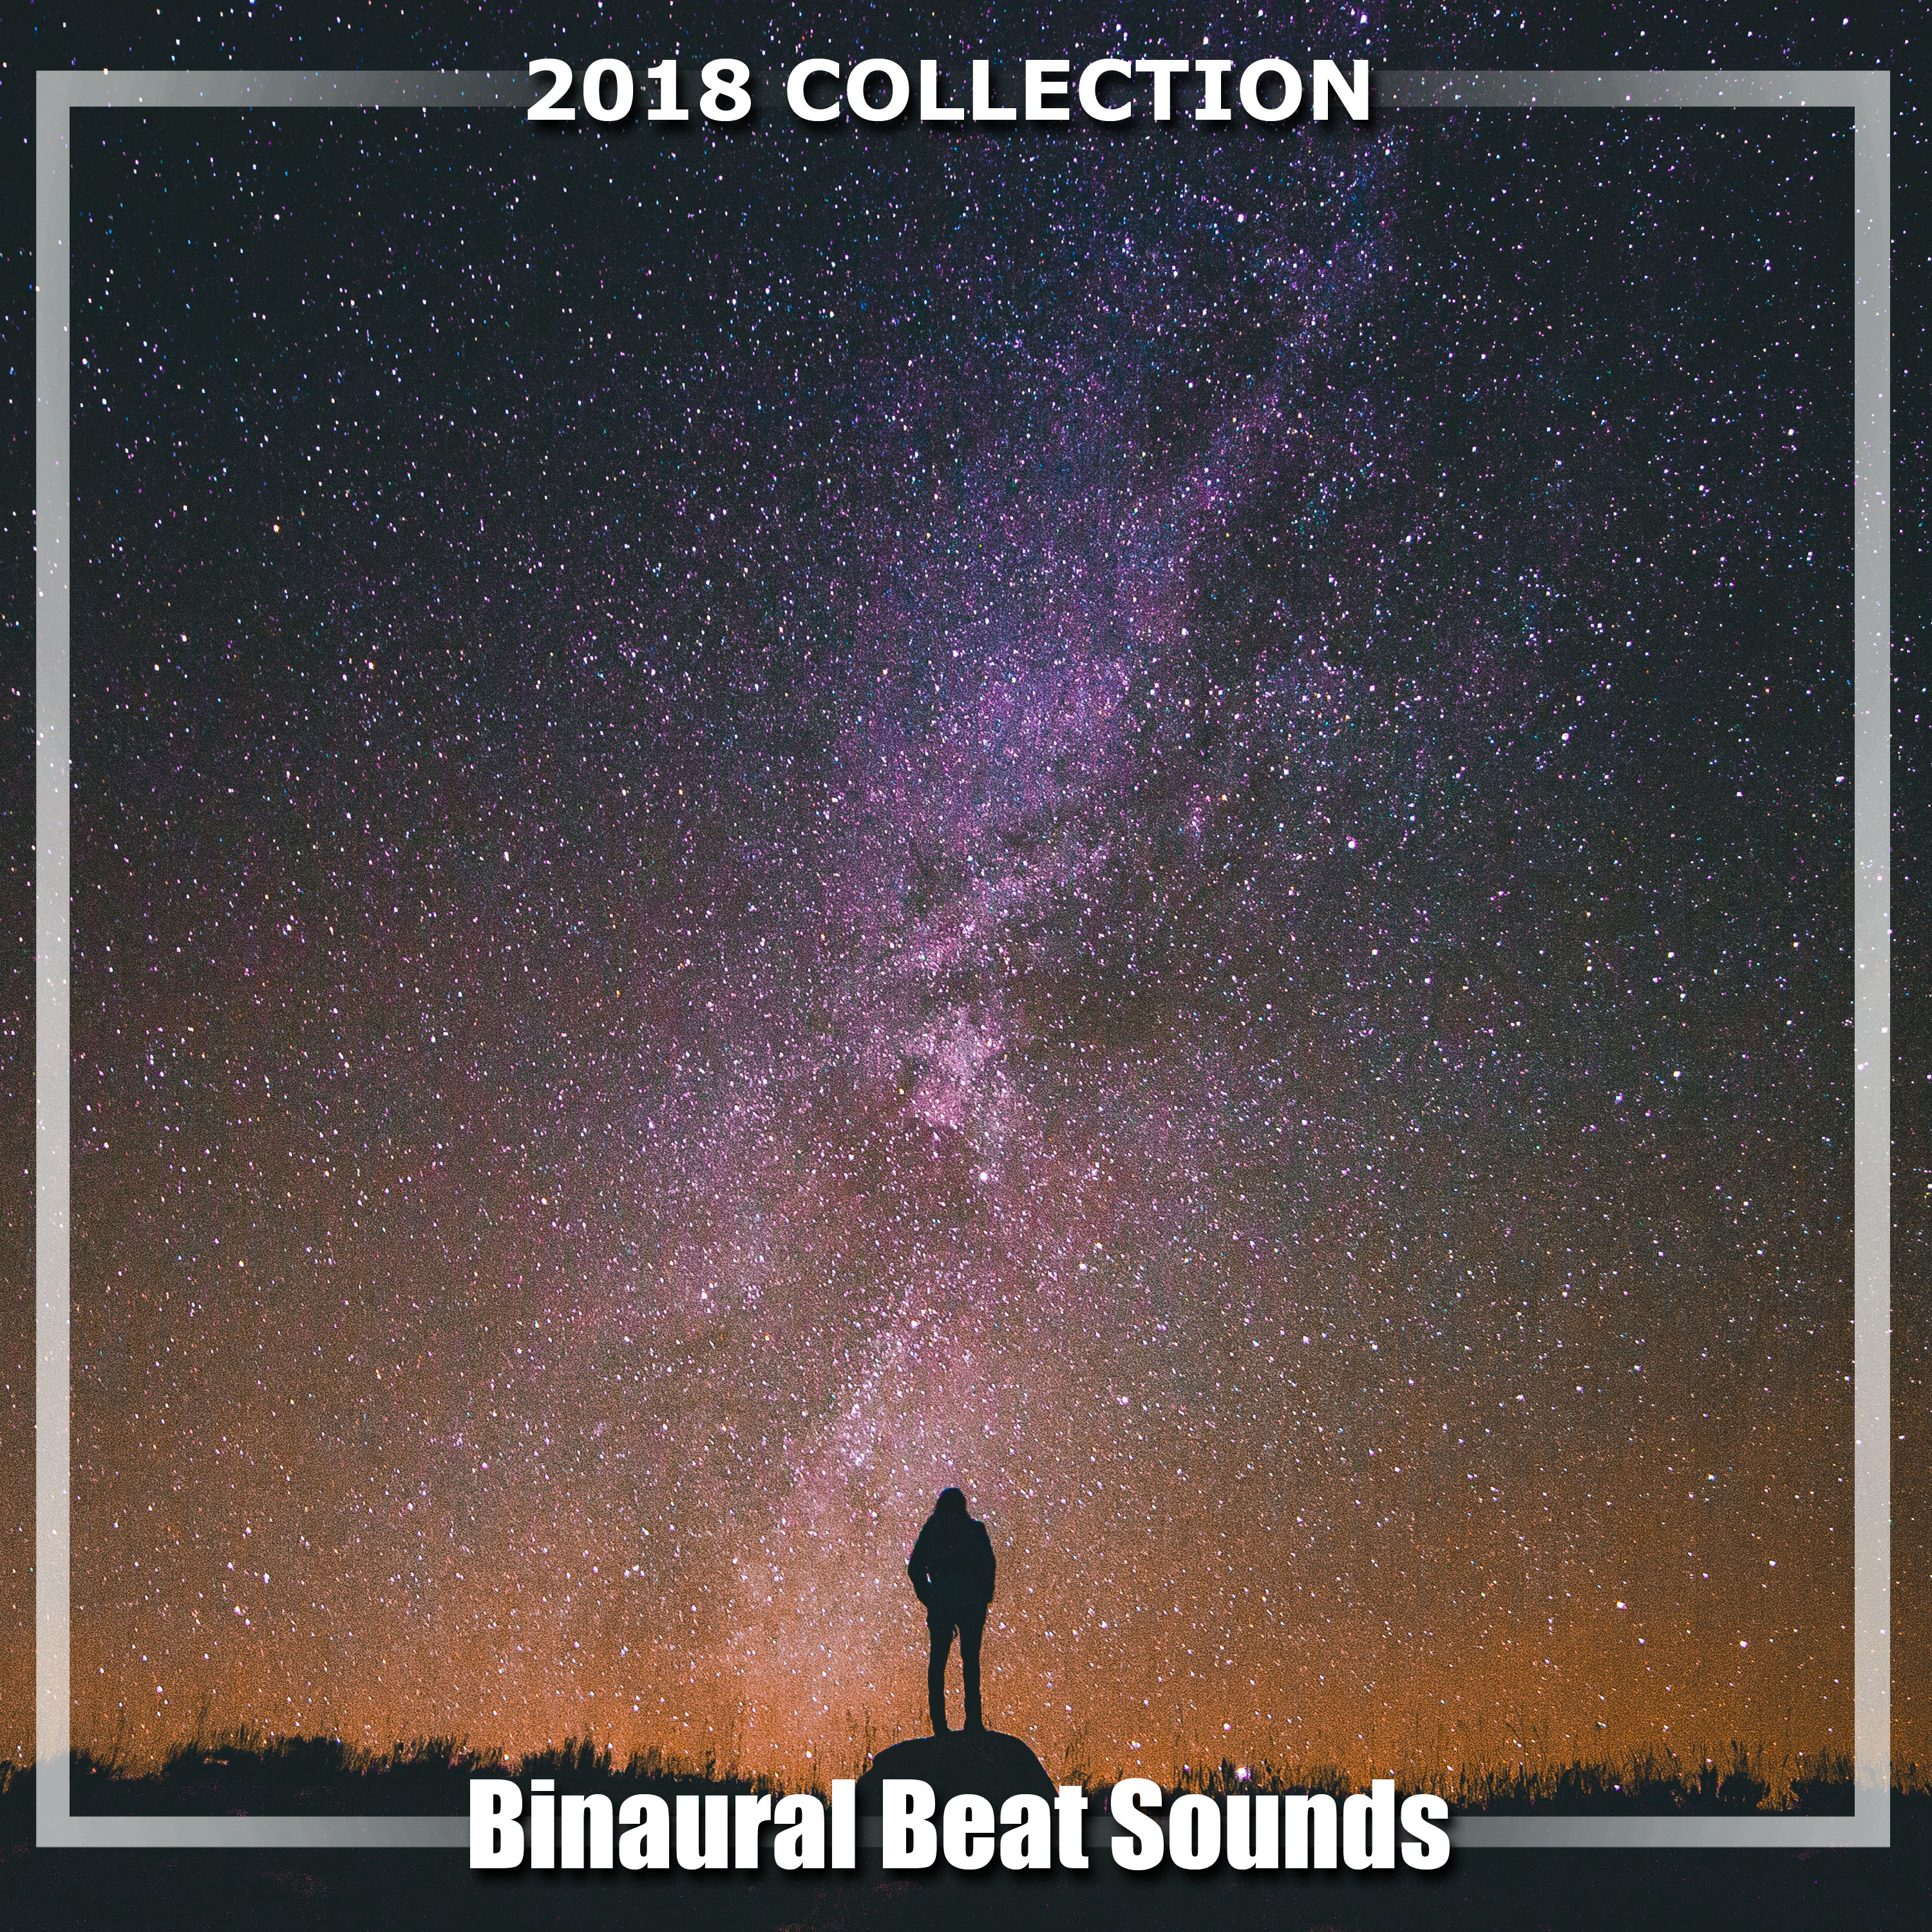 2018 A Wonderful Collection of Binaural Beat Sounds